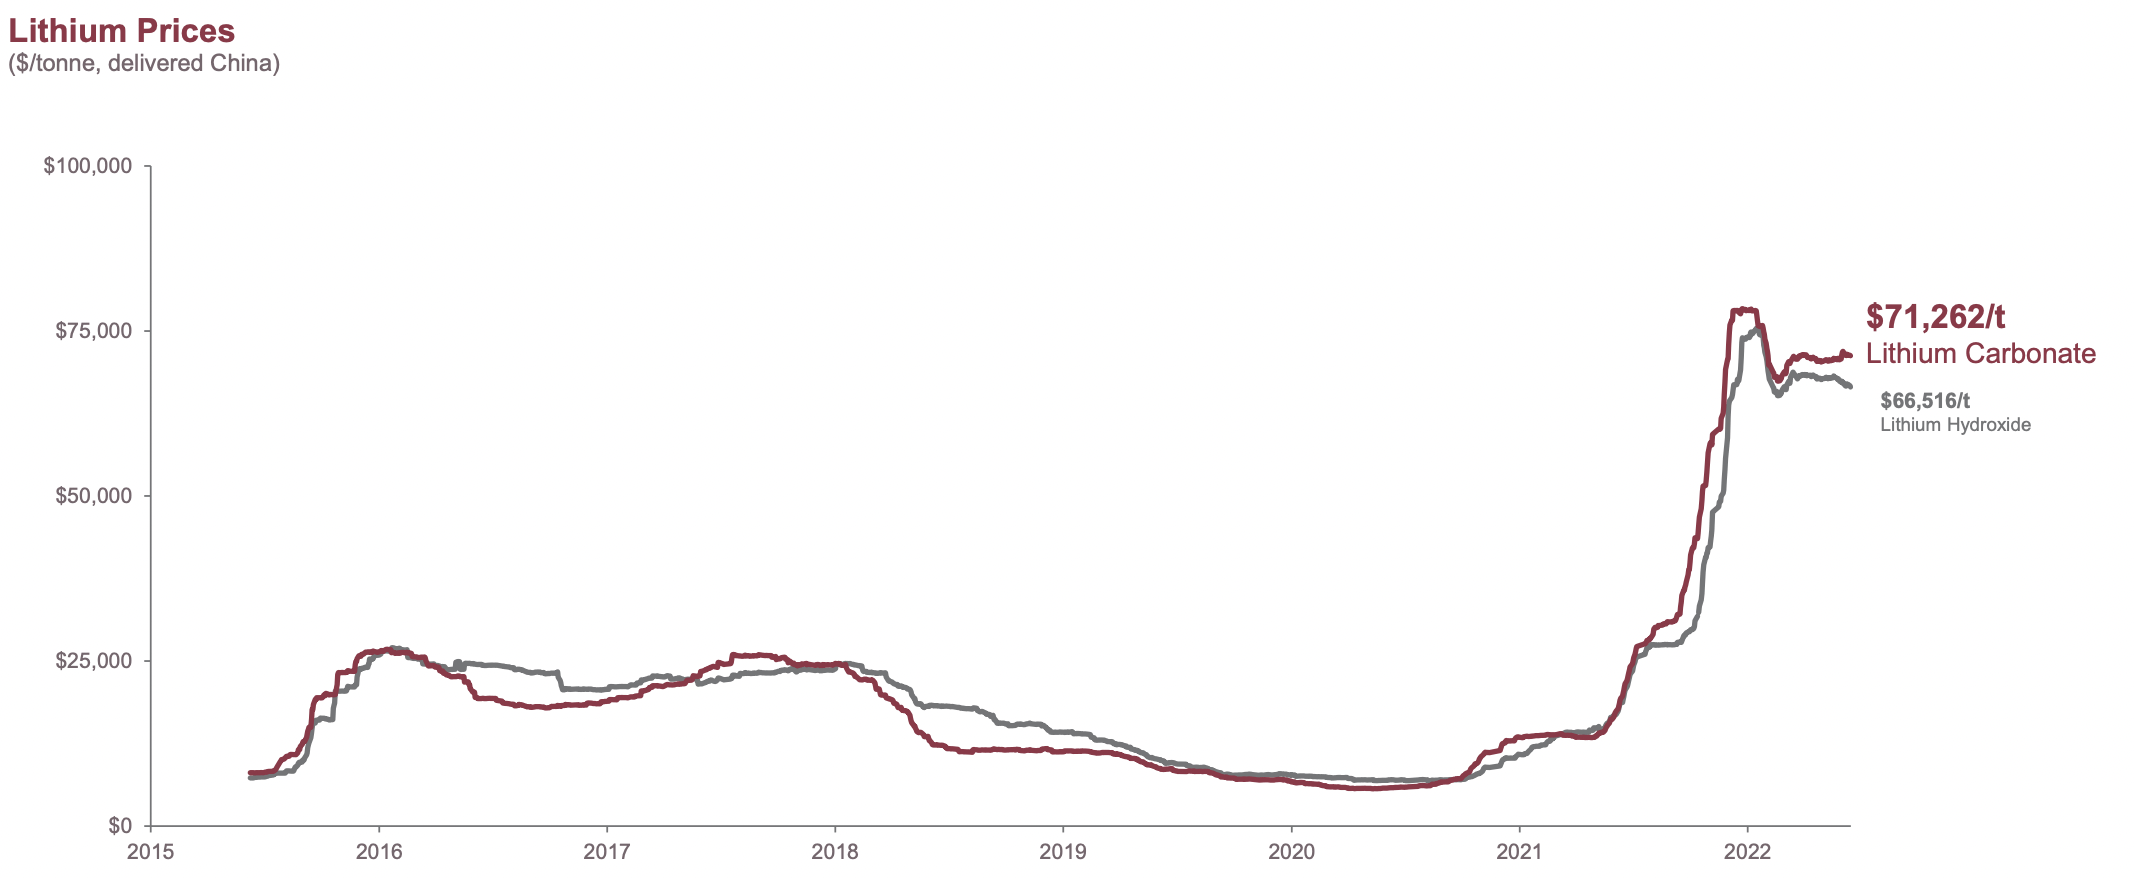 Lithium prices since 2015